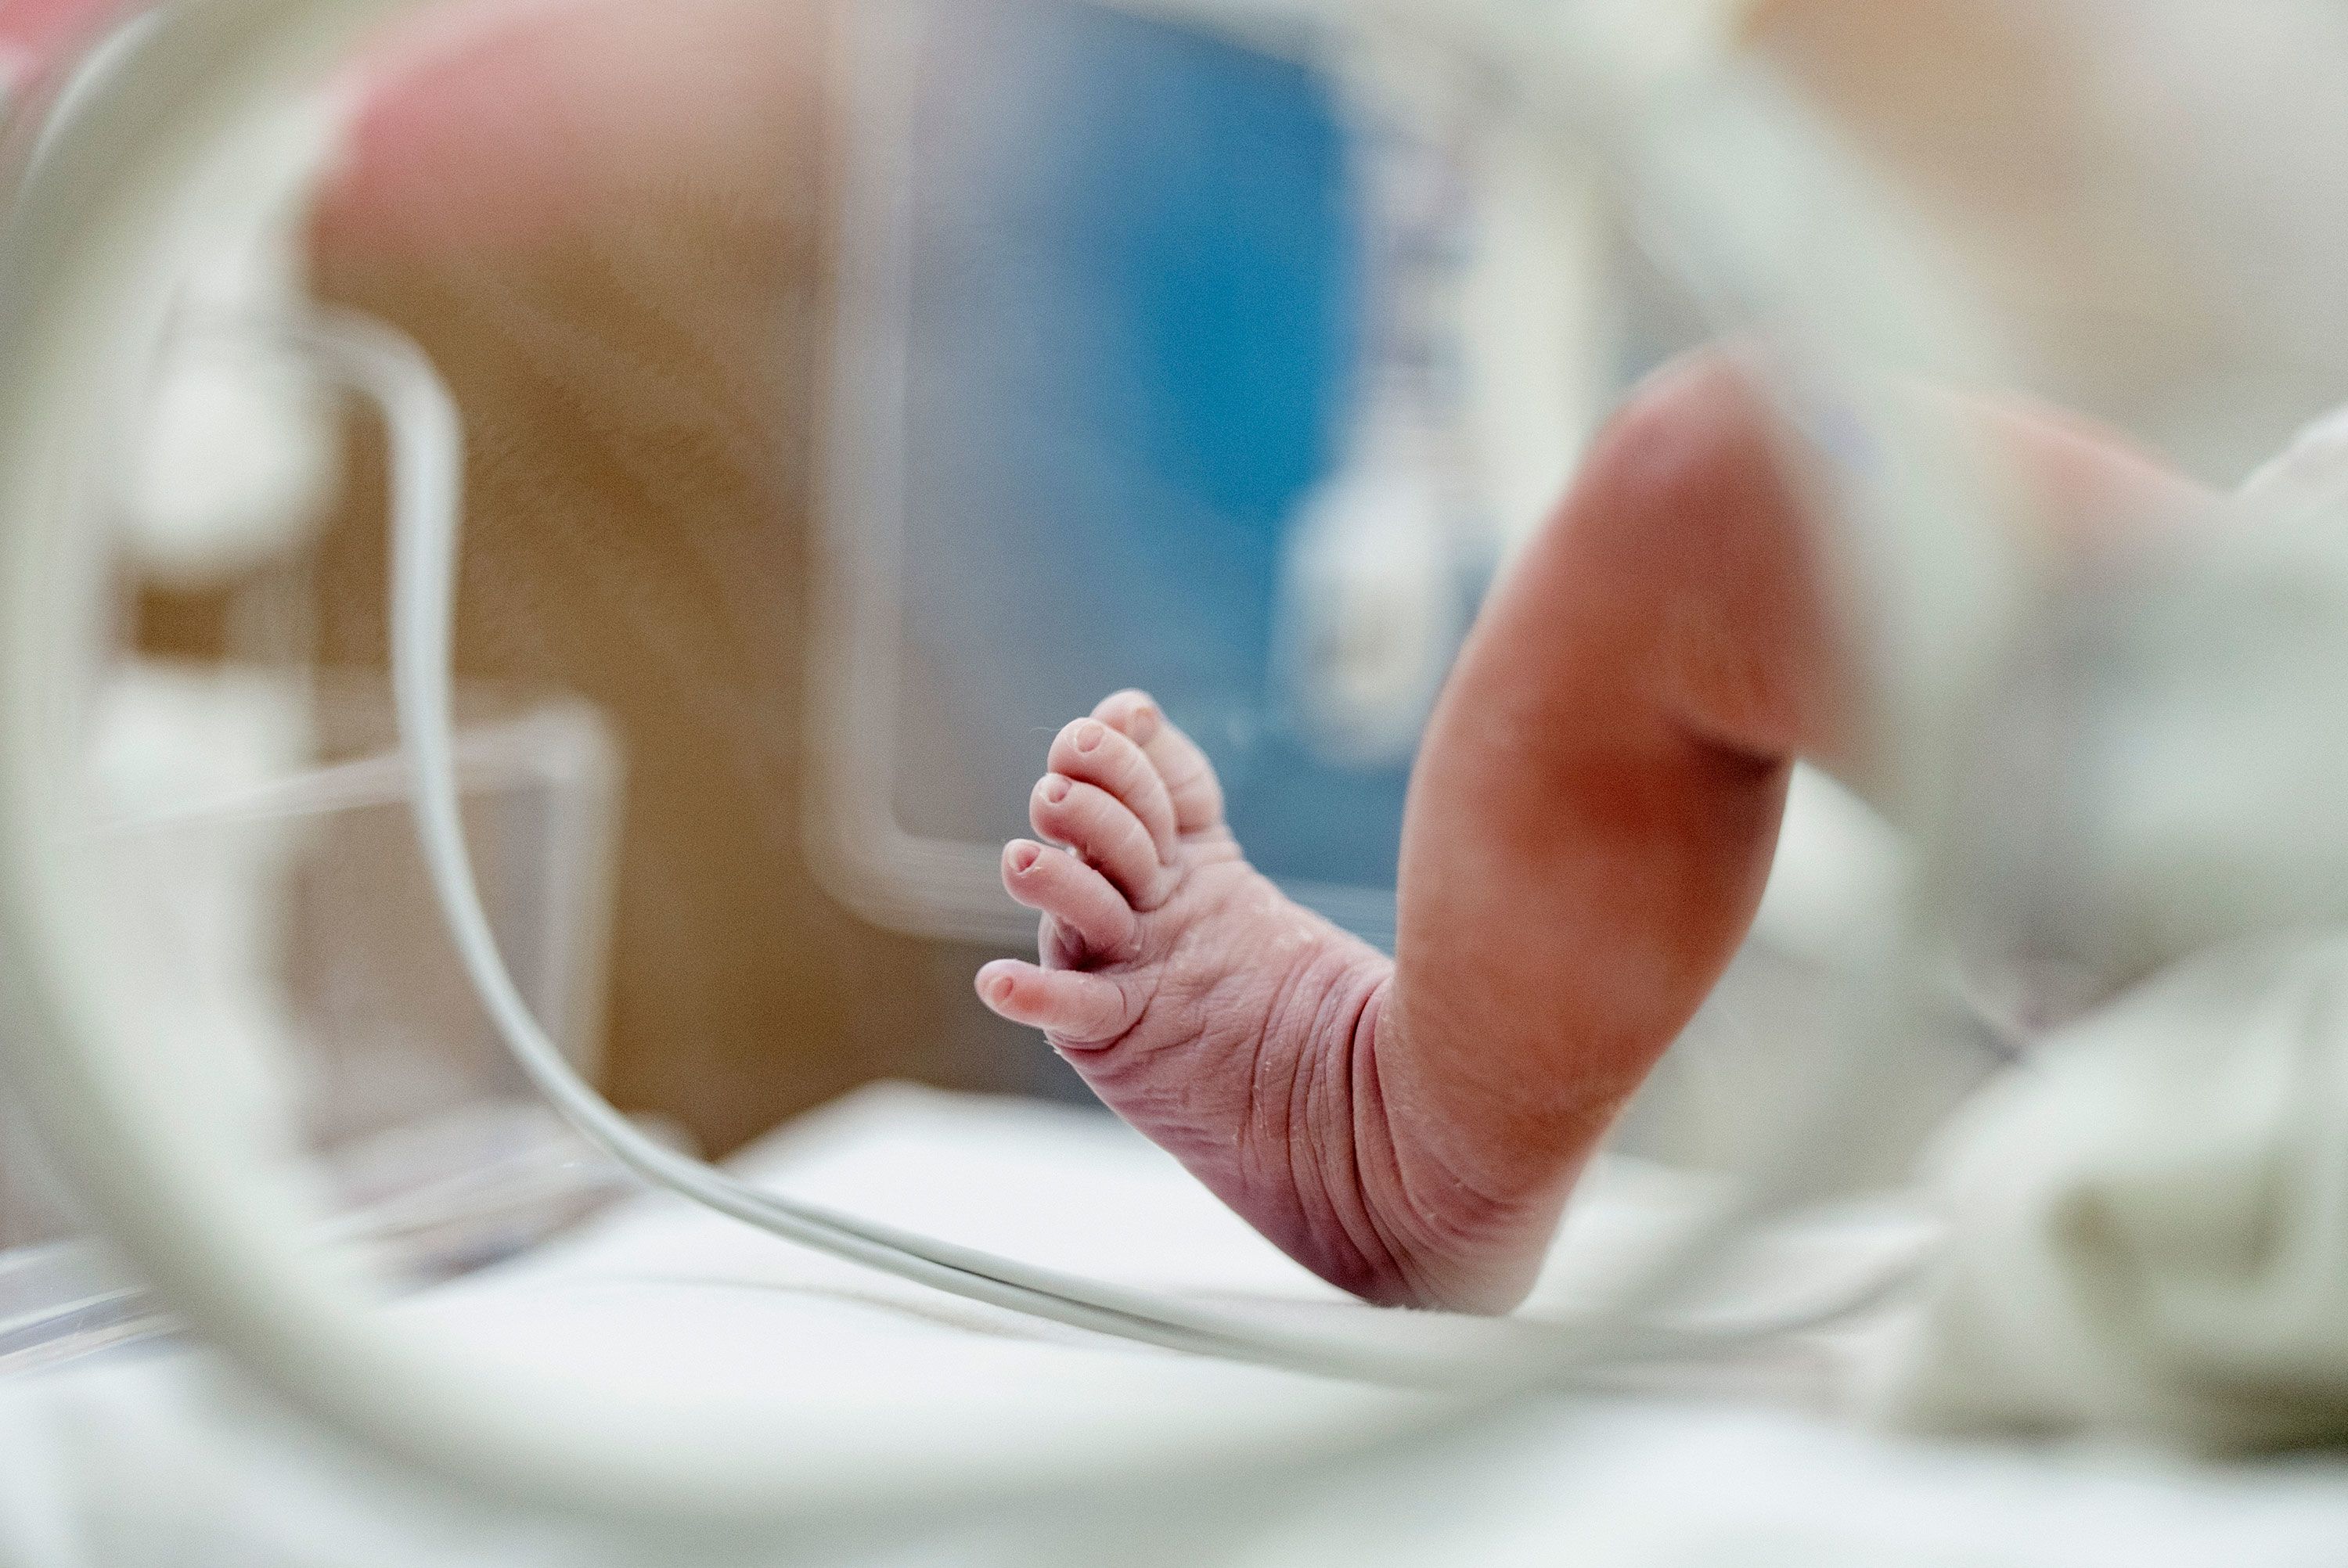 Everywhere' chemicals linked to rise in preterm births, study says